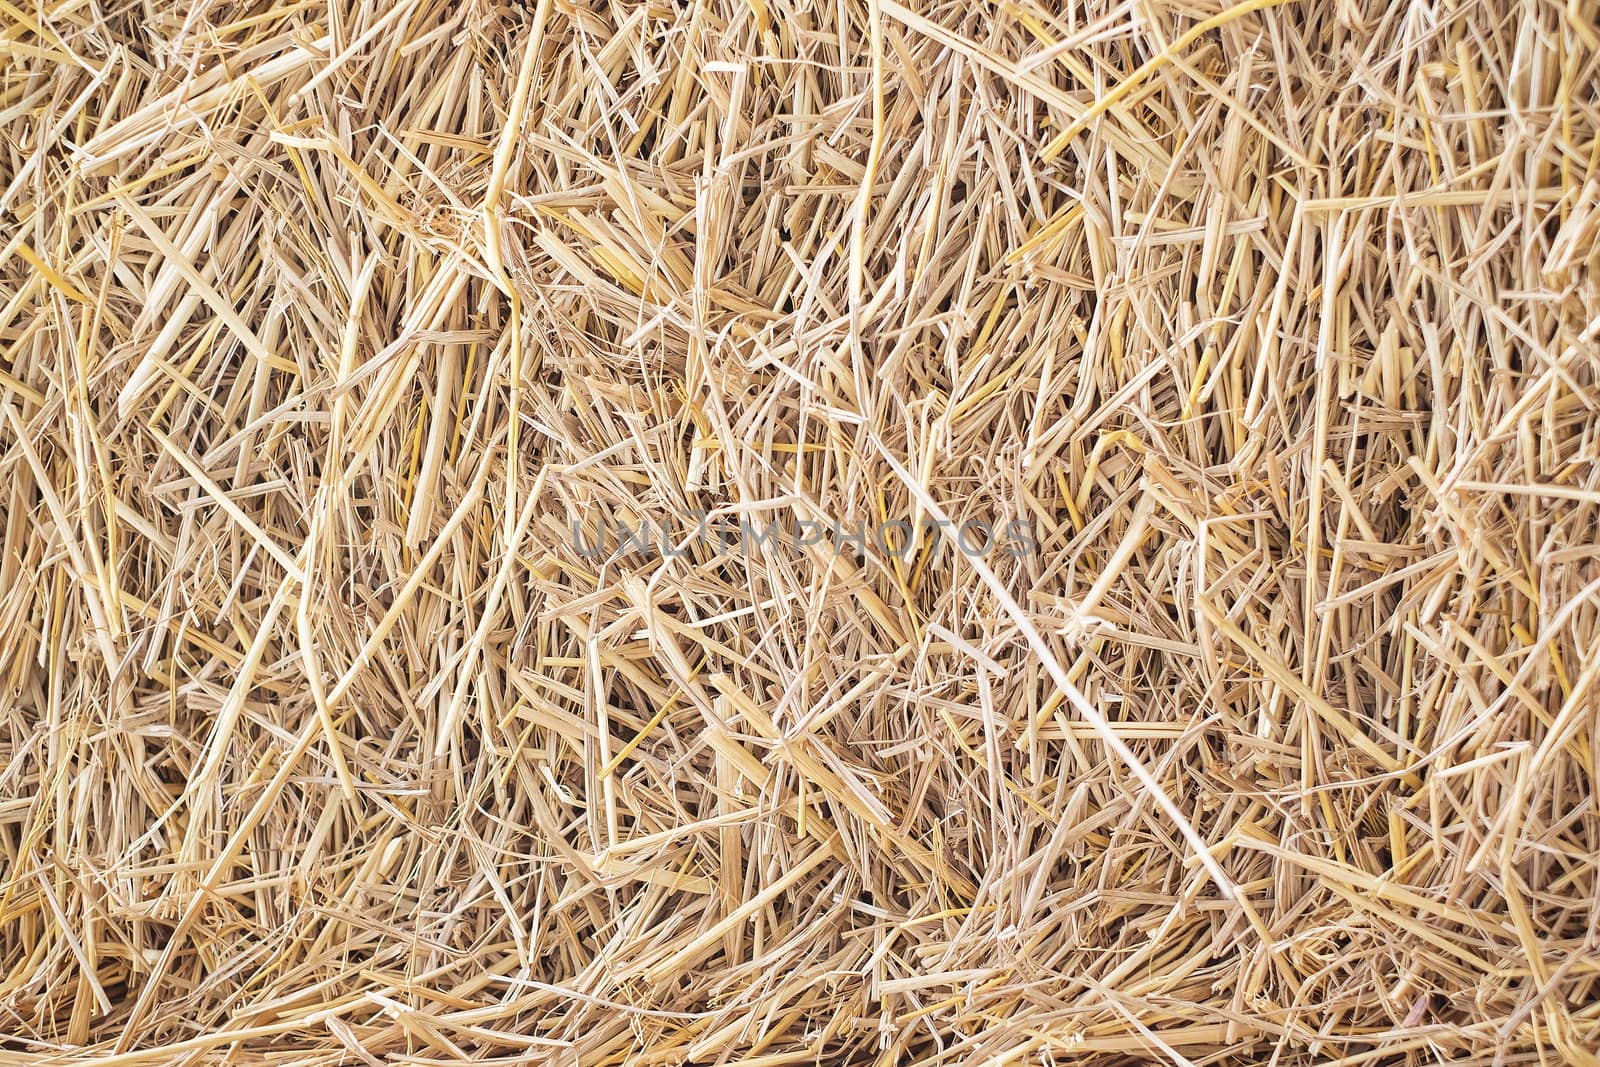 Dry straw Background or Texture